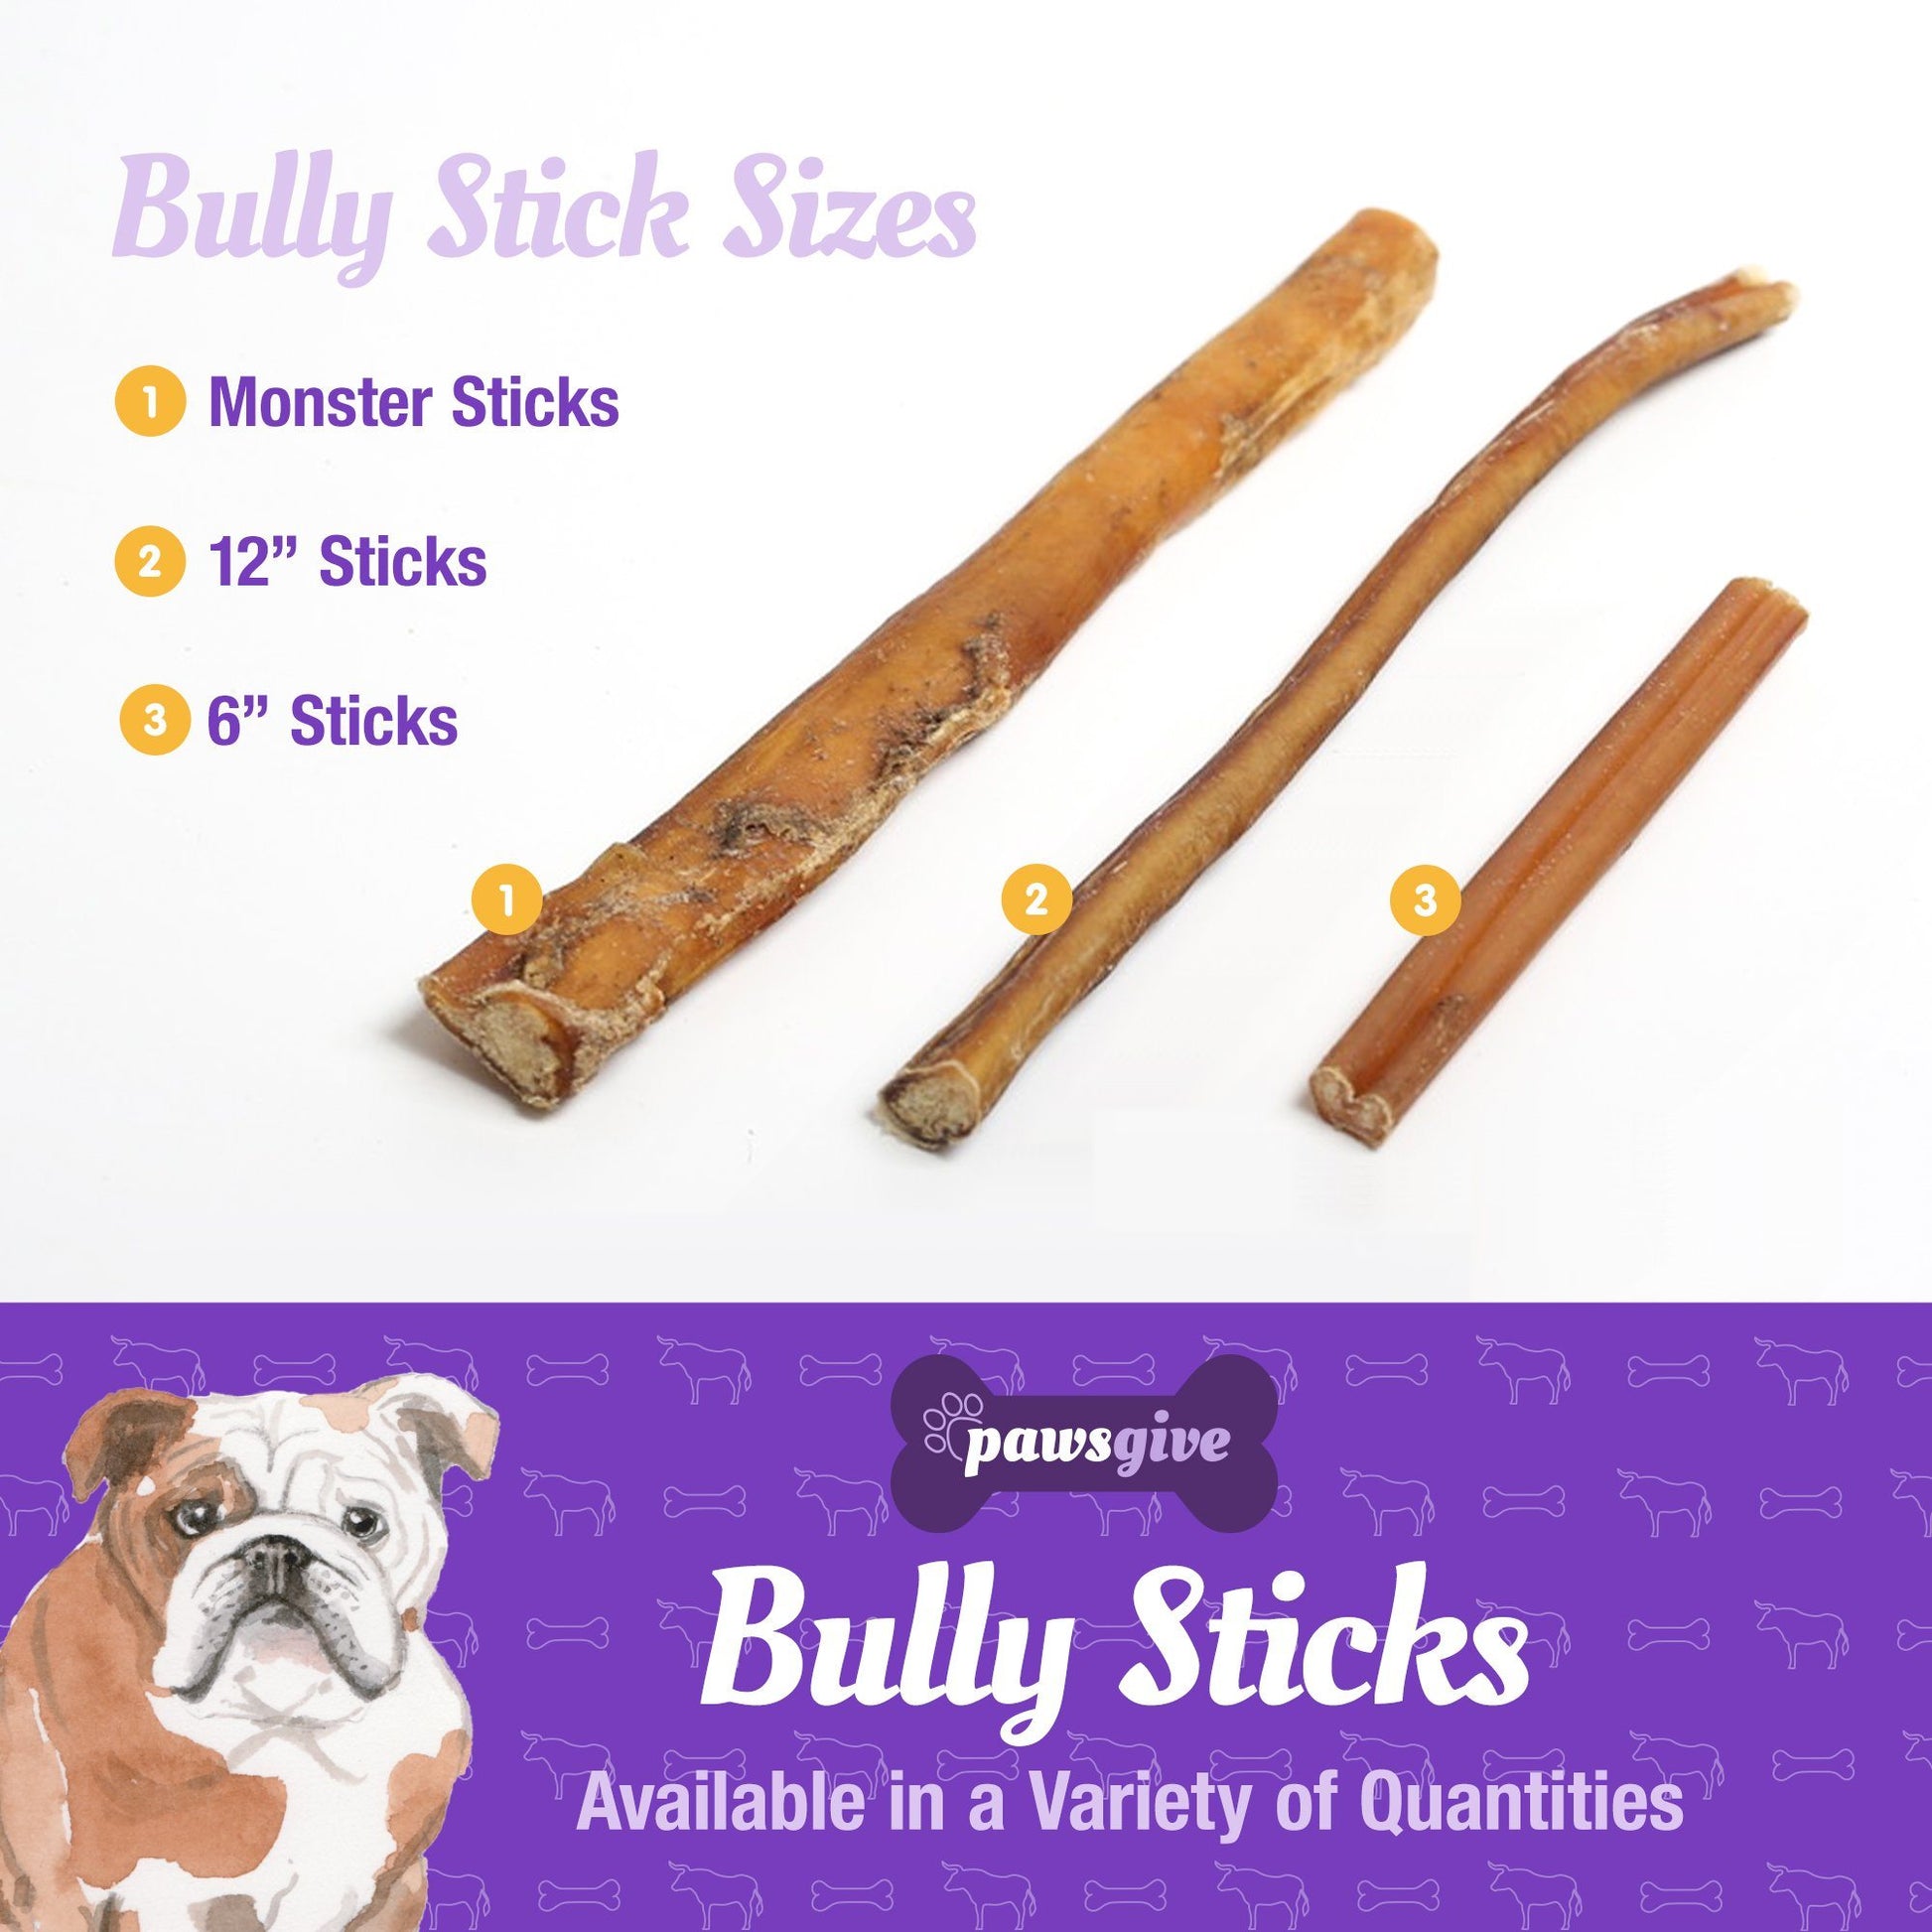 PawsGive - PawsGive 12" Bully Sticks For Dogs From Grass Fed Free Range Cattle